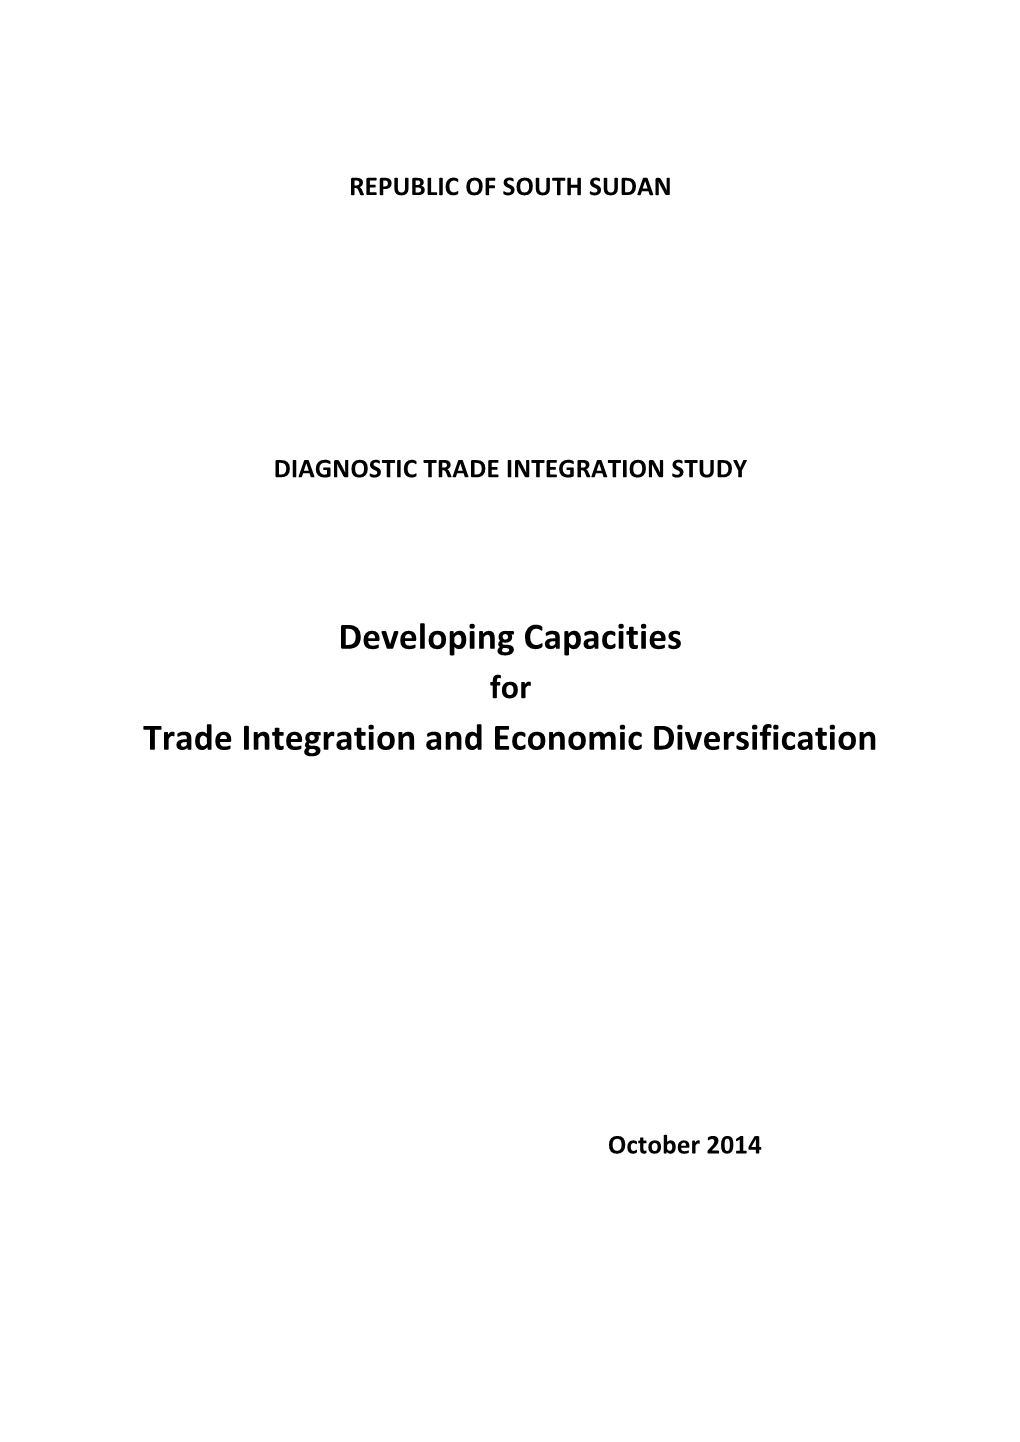 COUNTRY ANALYSIS Developing Capacities for Trade Integration and Economic Diversification